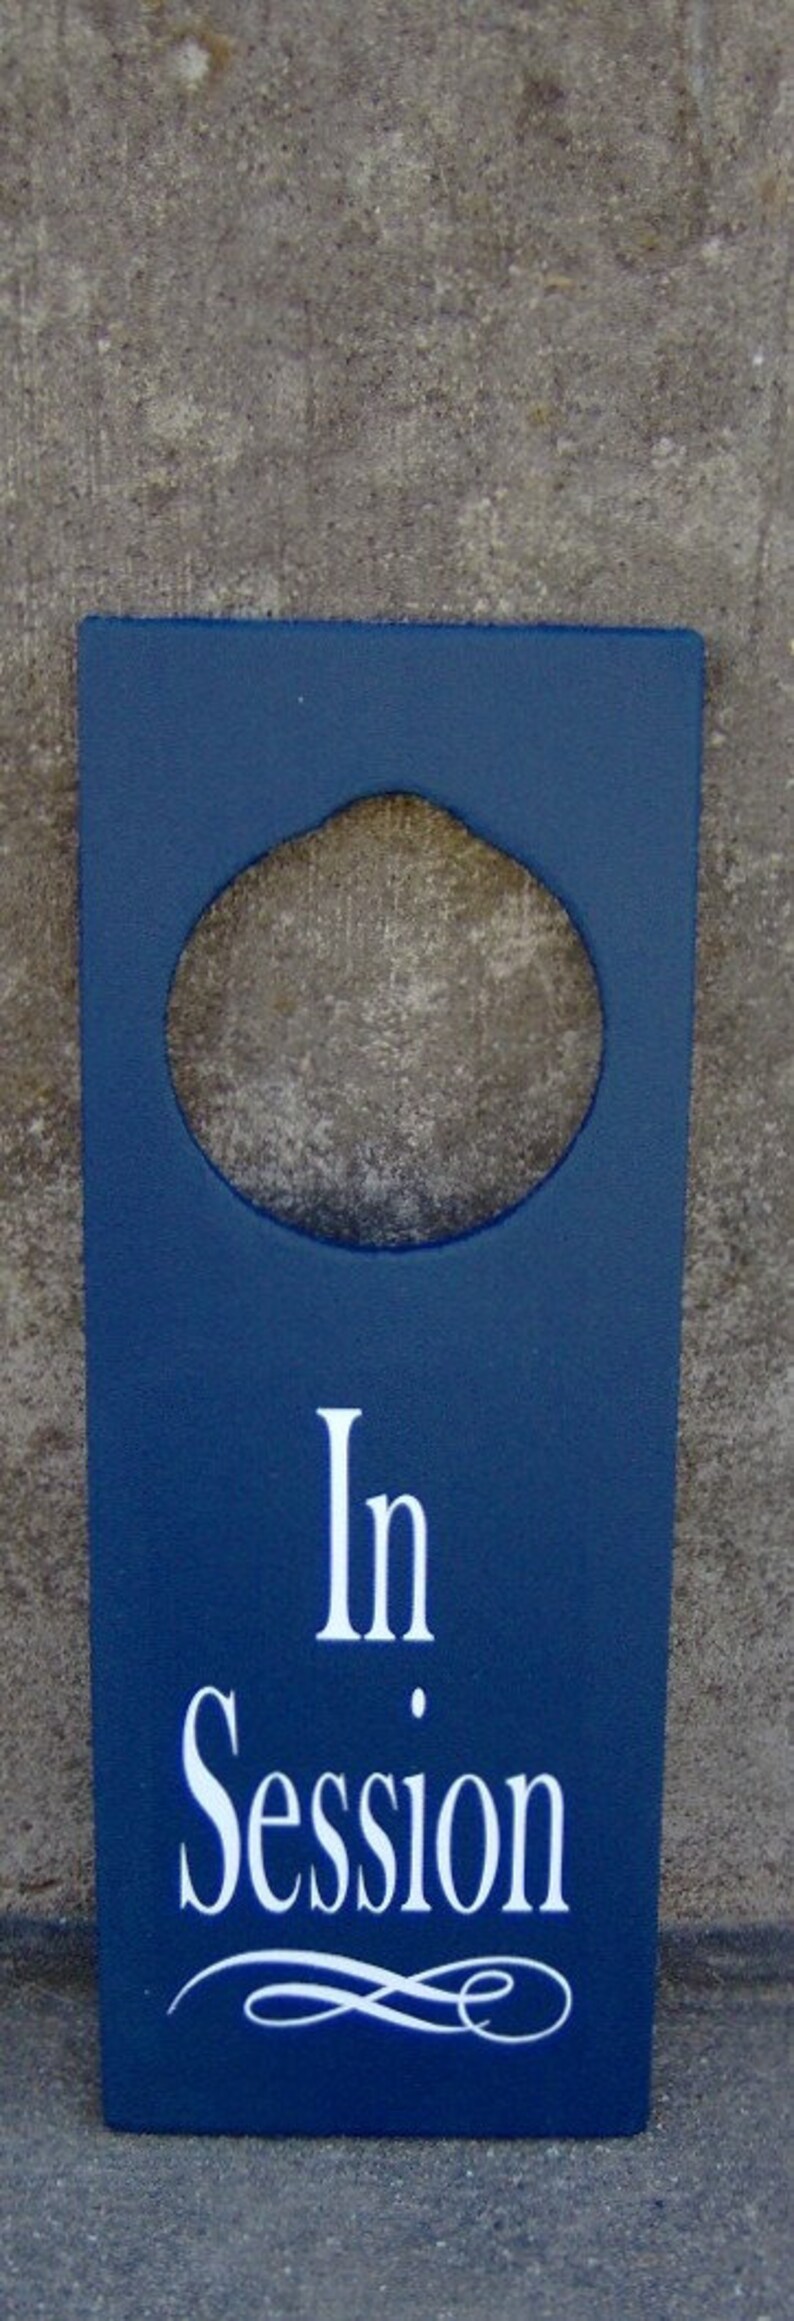 In Session Door Knob Hanger Wood Vinyl Sign Nautical Navy Blue Business Retail Shop Spa Salon Massage Therapy Private Please Wait Inform image 8